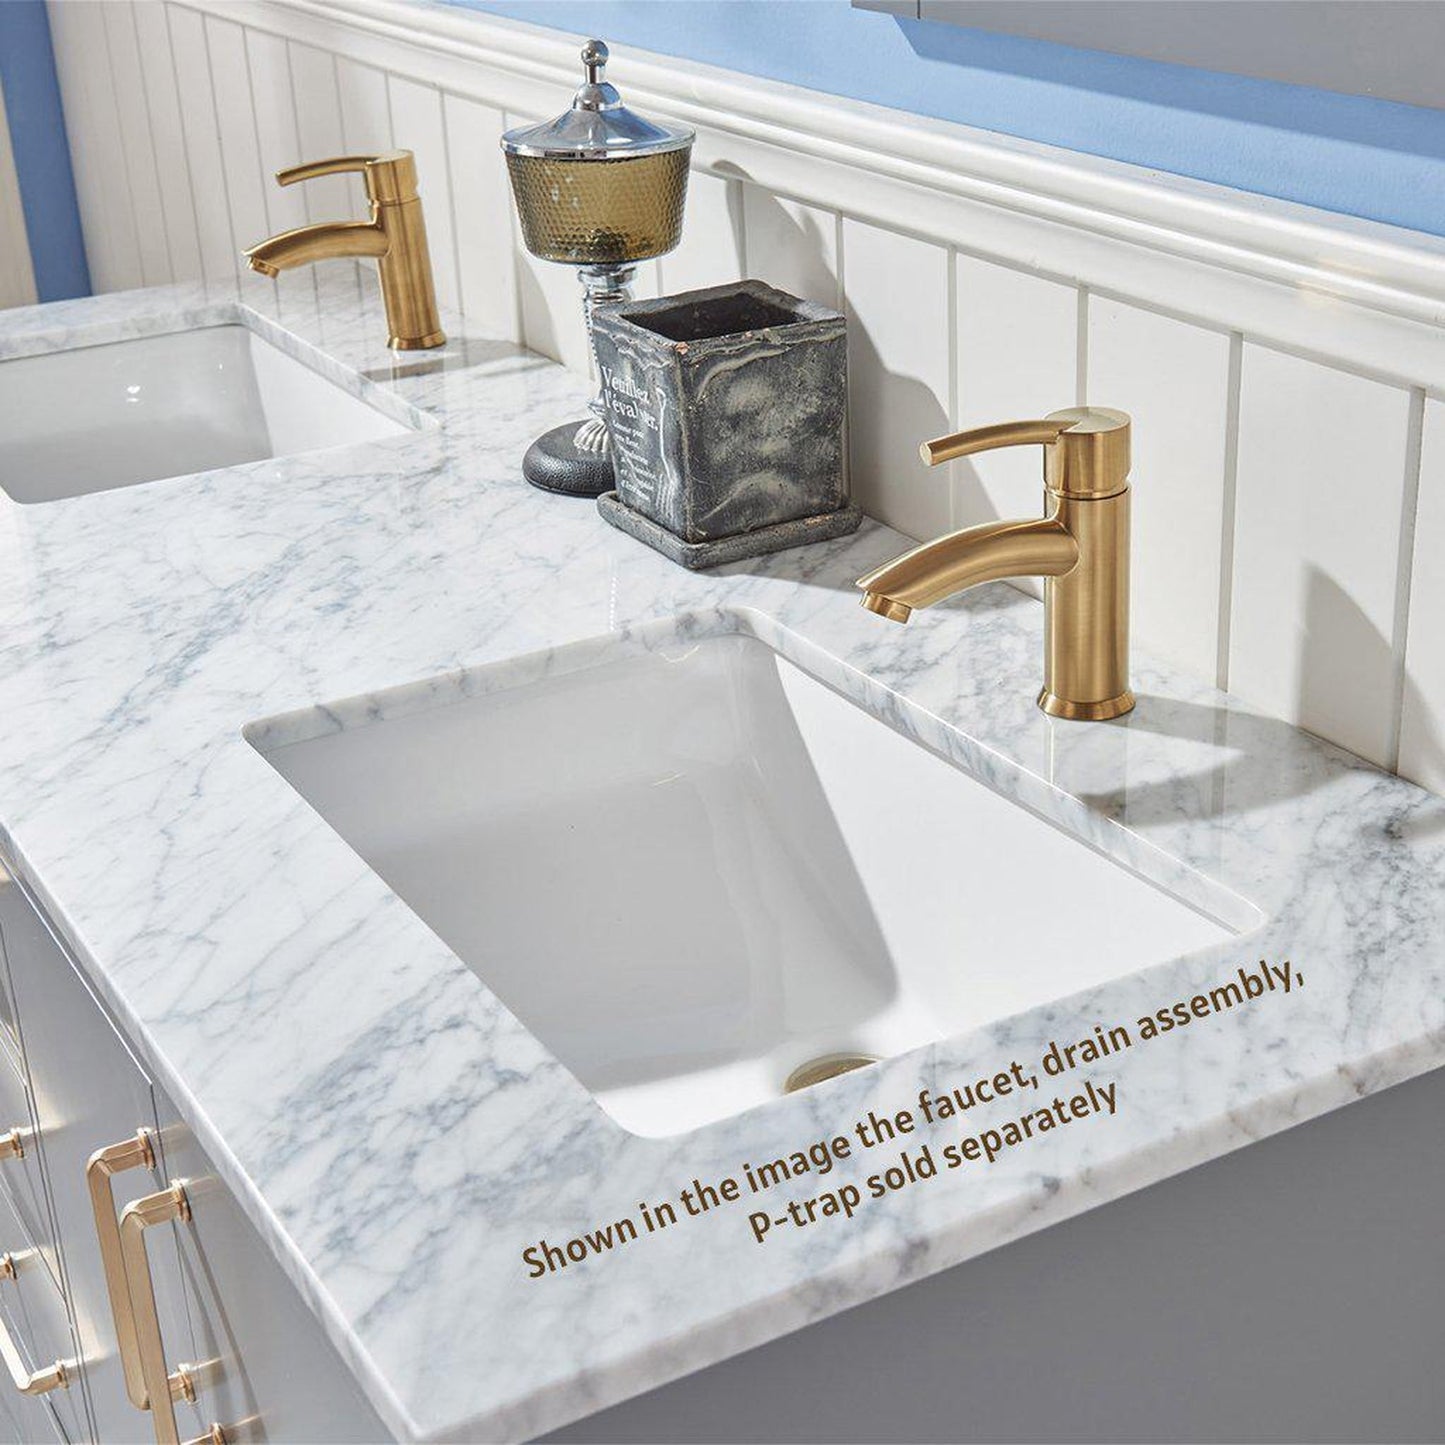 Altair Sutton 60" Double Gray Freestanding Bathroom Vanity Set With Natural Carrara White Marble Two Rectangular Undermount Ceramic Sinks, and Overflow